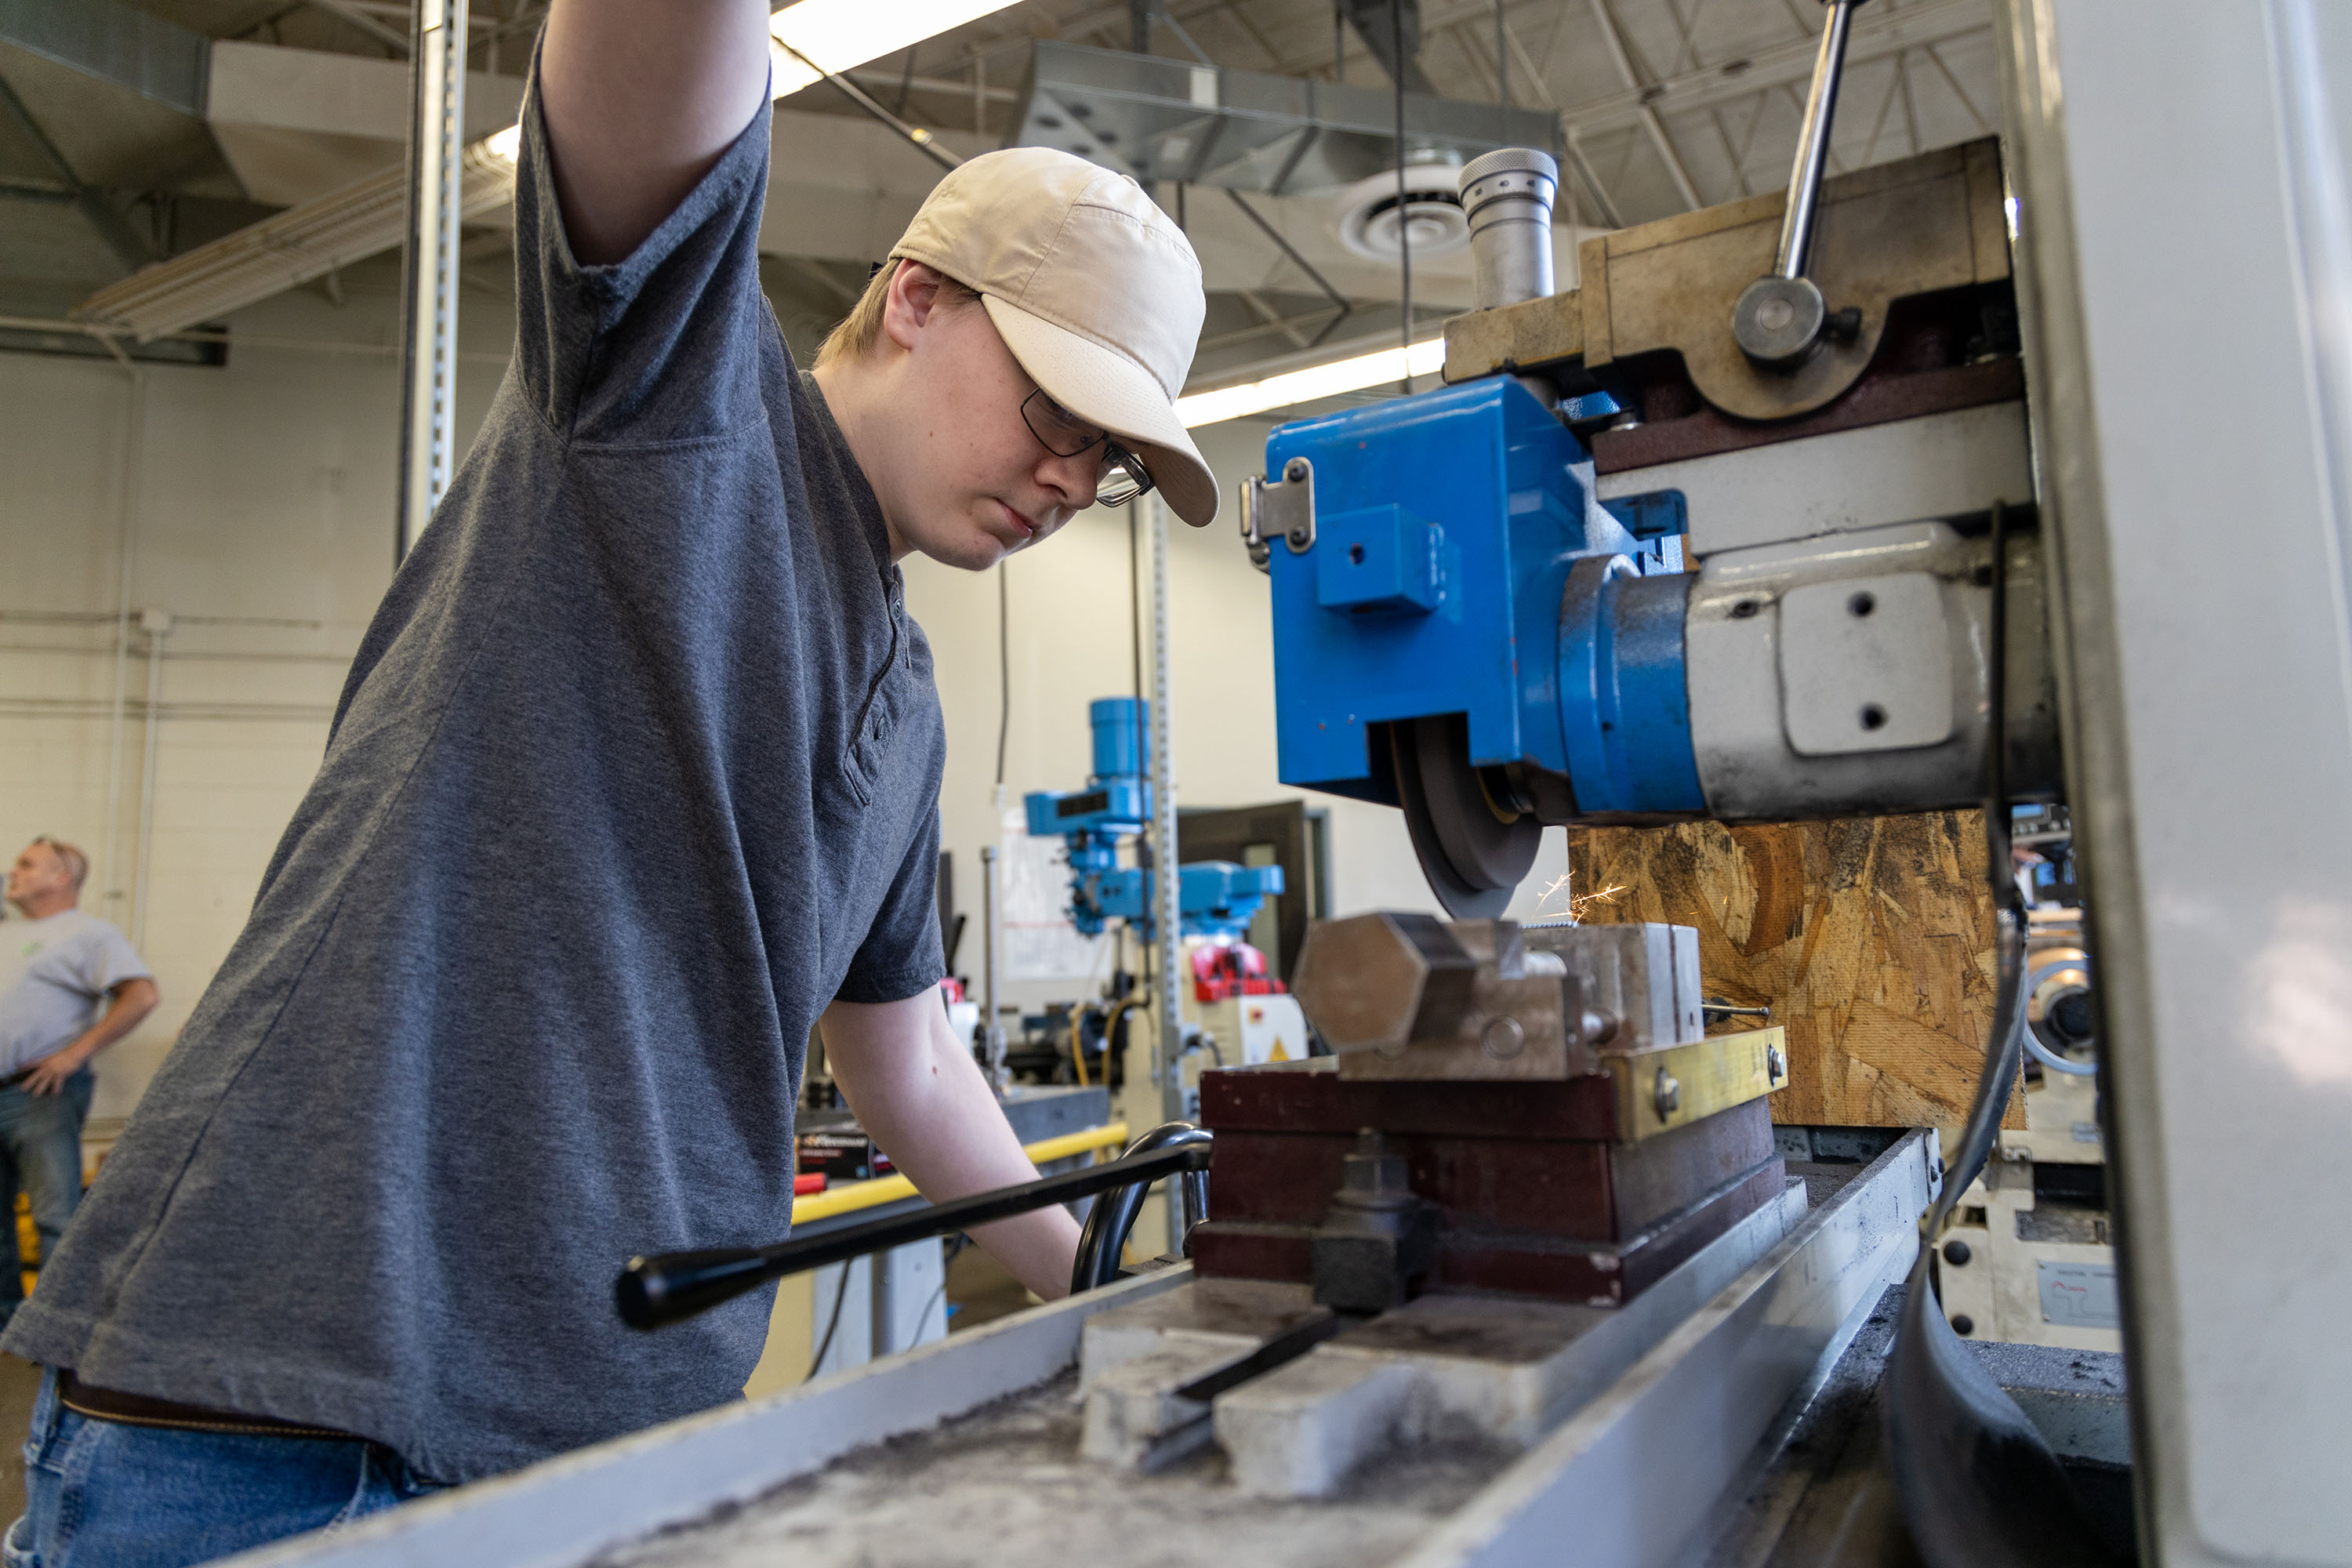 Student using machinery in Advanced Manufacturing class